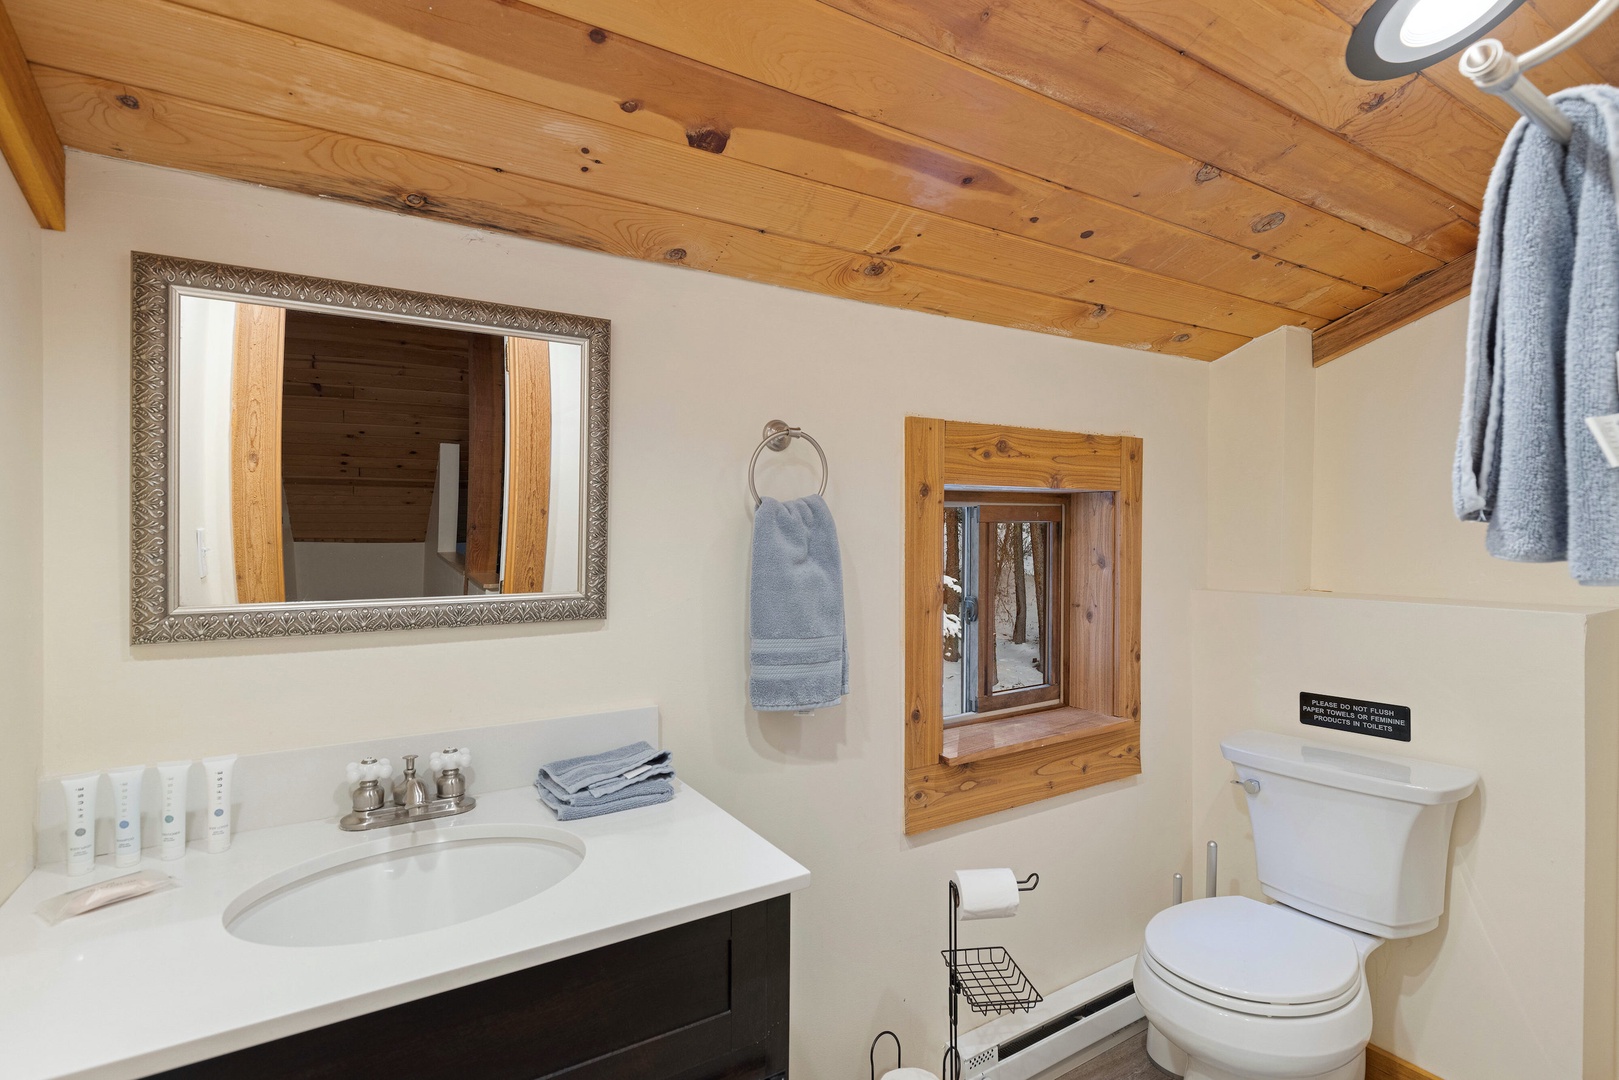 The upper-level ensuite includes a single vanity & shower